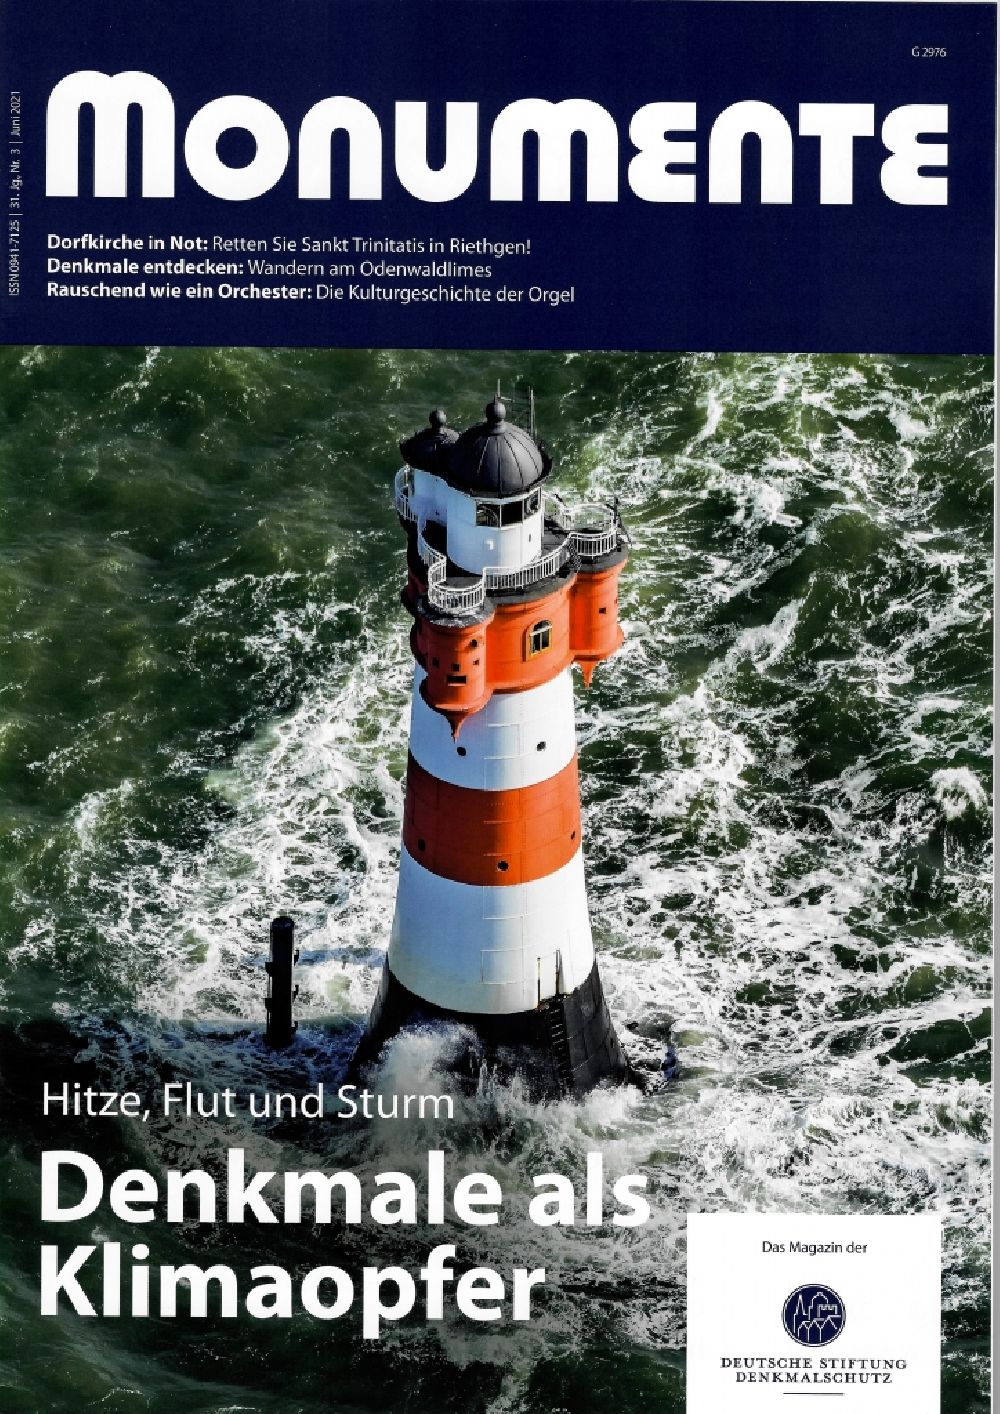 Aerial photograph Butjadingen - Picture Section / media use of aerial use in the magazine title Monumente page 1, lighthouse added to in Butjadingen in the state Lower Saxony, Germany